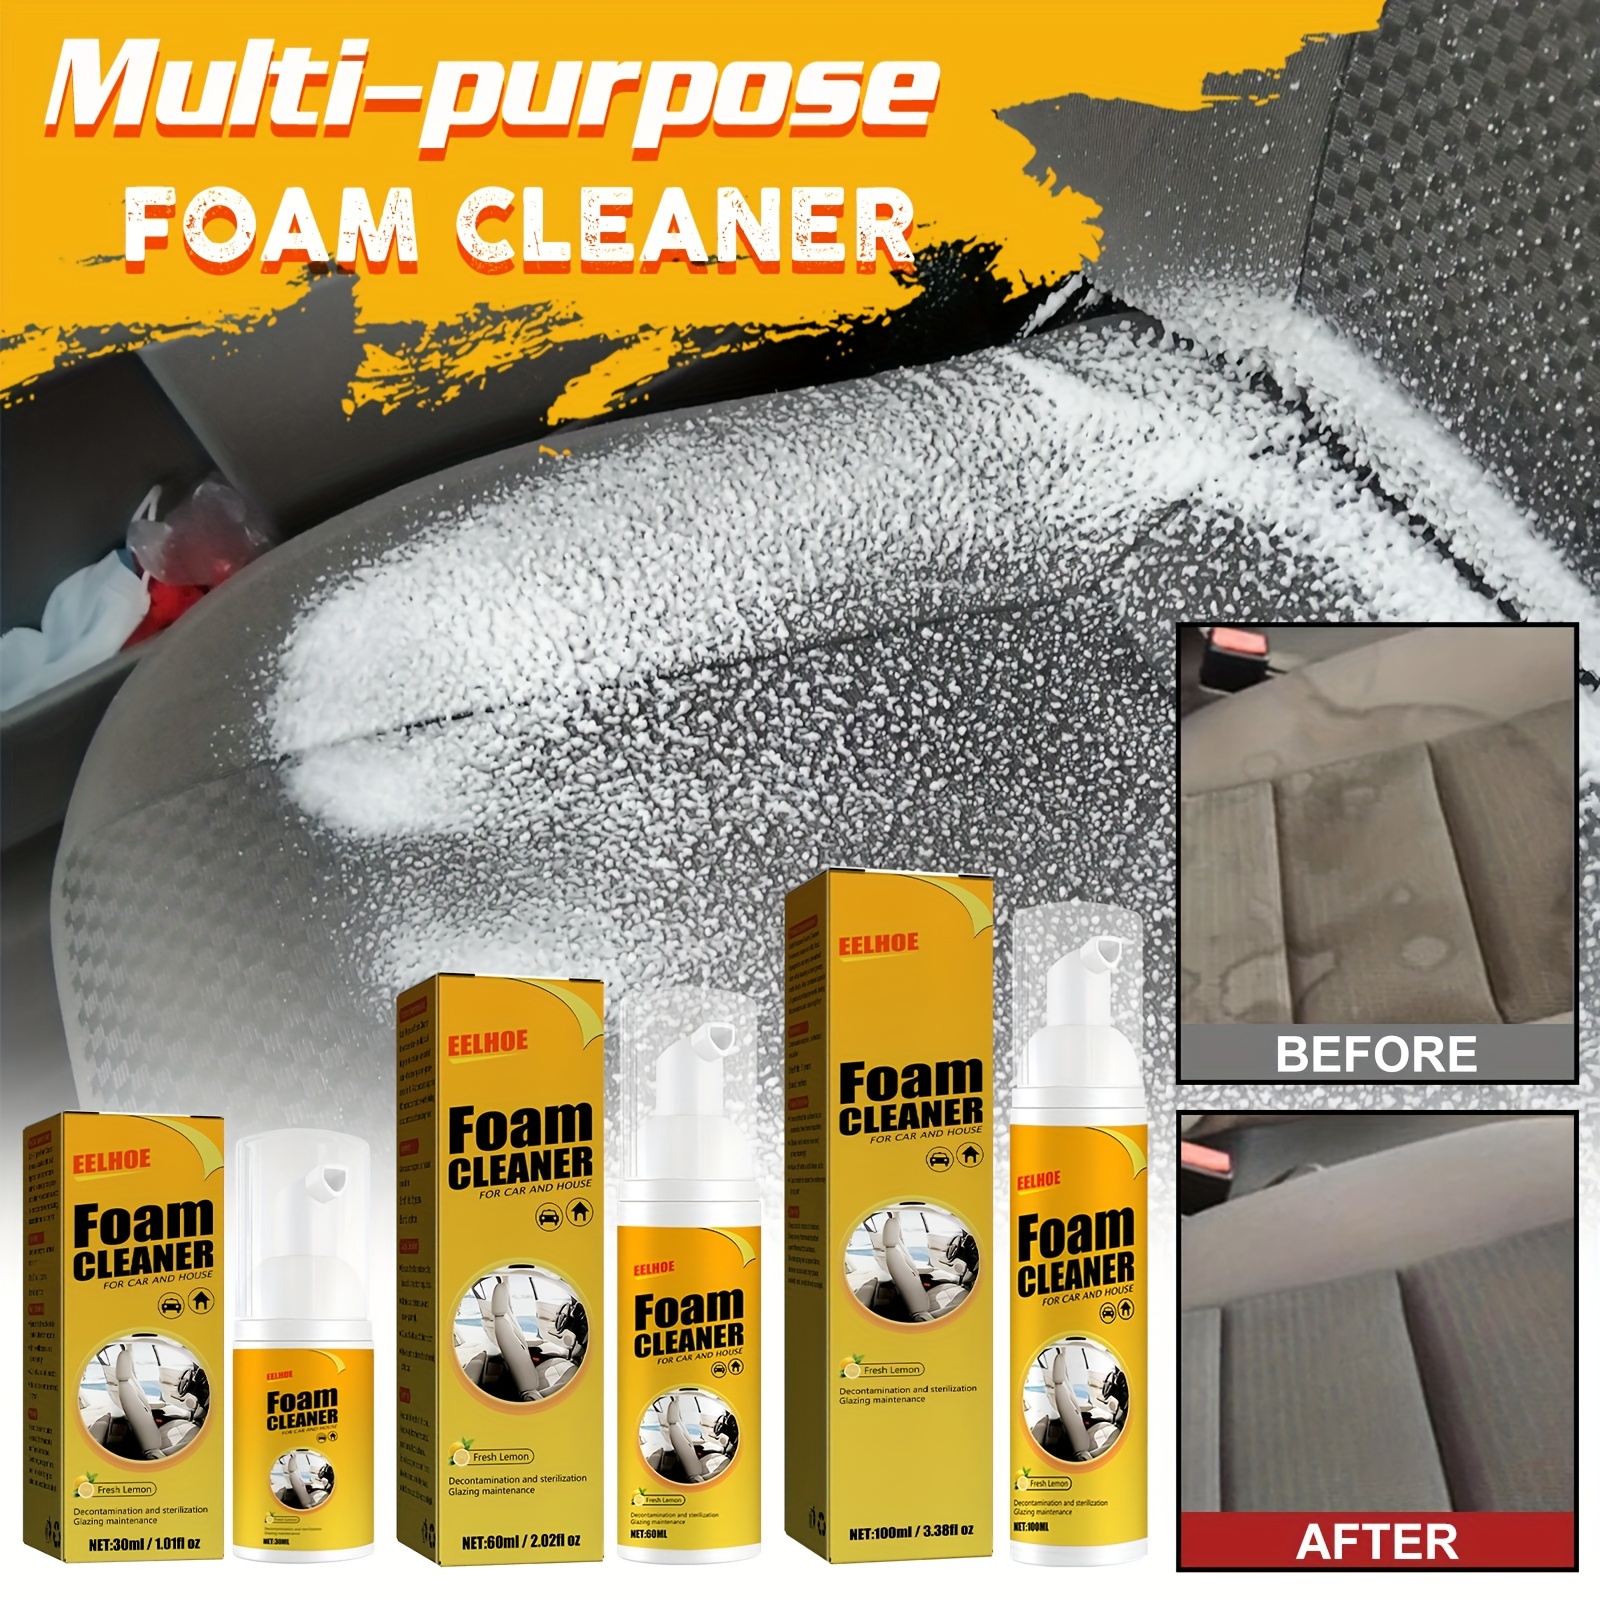 Superfoam Bubble Cleaner, Super Powerful Multi Purpose Foam Cleaner, Stain Removal Kit for Kitchen, Super Magic Stain Removal Foam Cleaner, Bubble